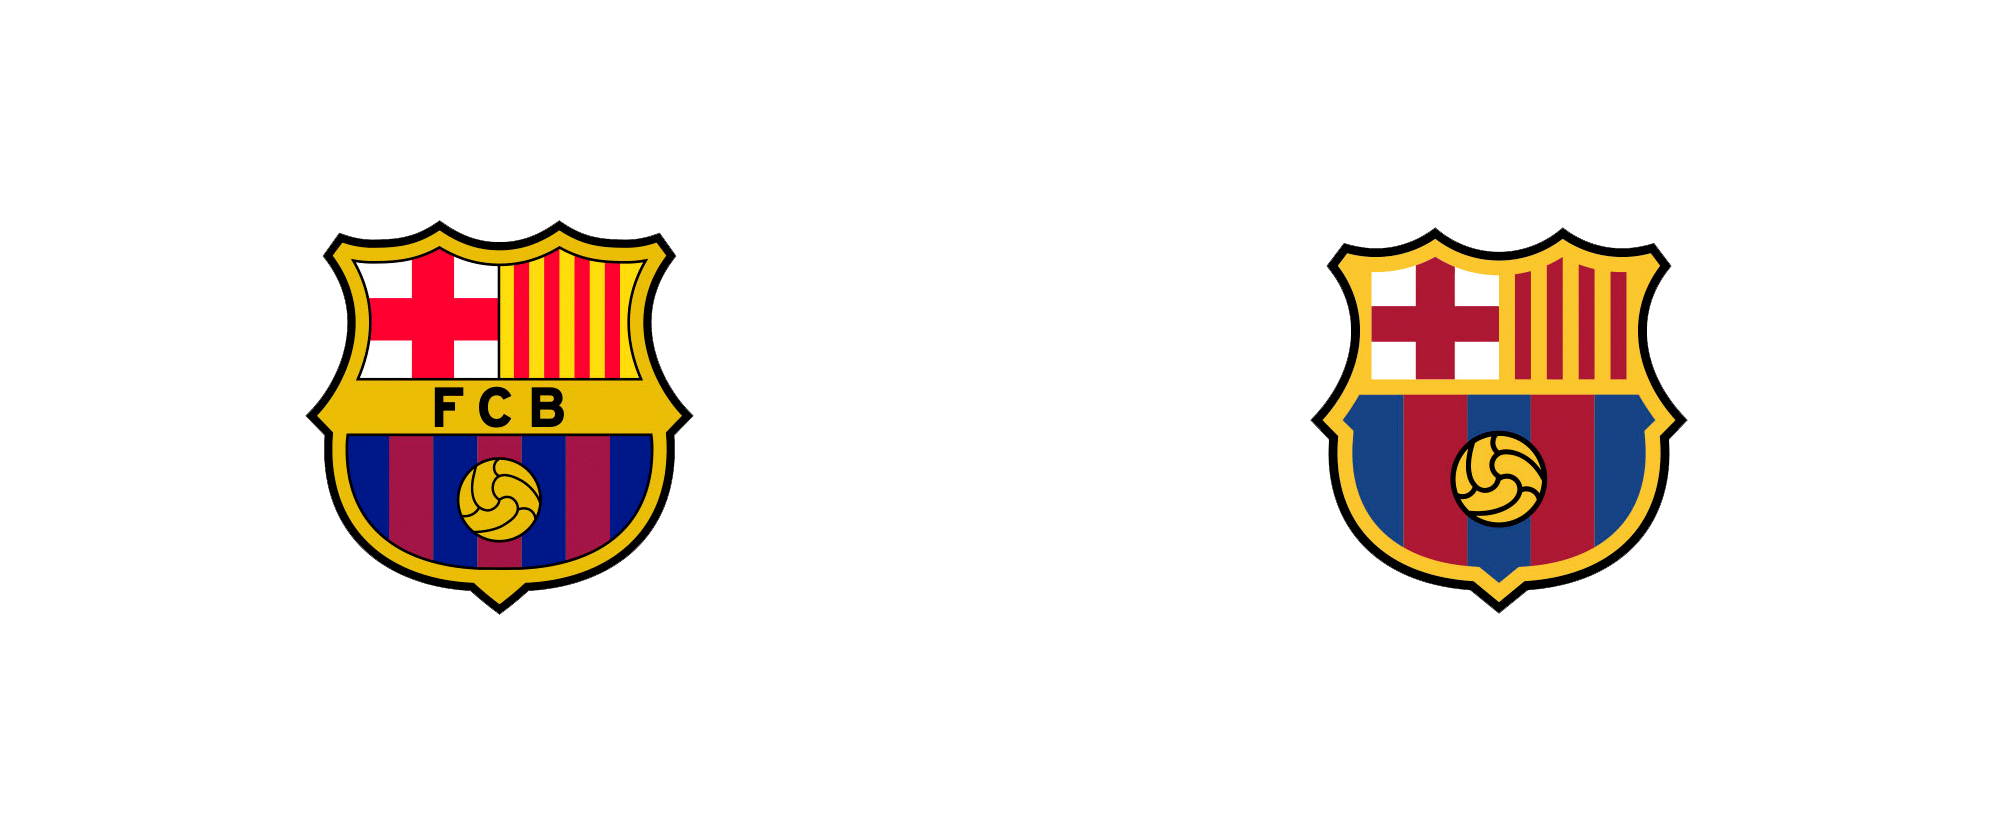 New Crest And Identity For Fc Barcelona By Summa - Fc Barcelona Logo Small - HD Wallpaper 